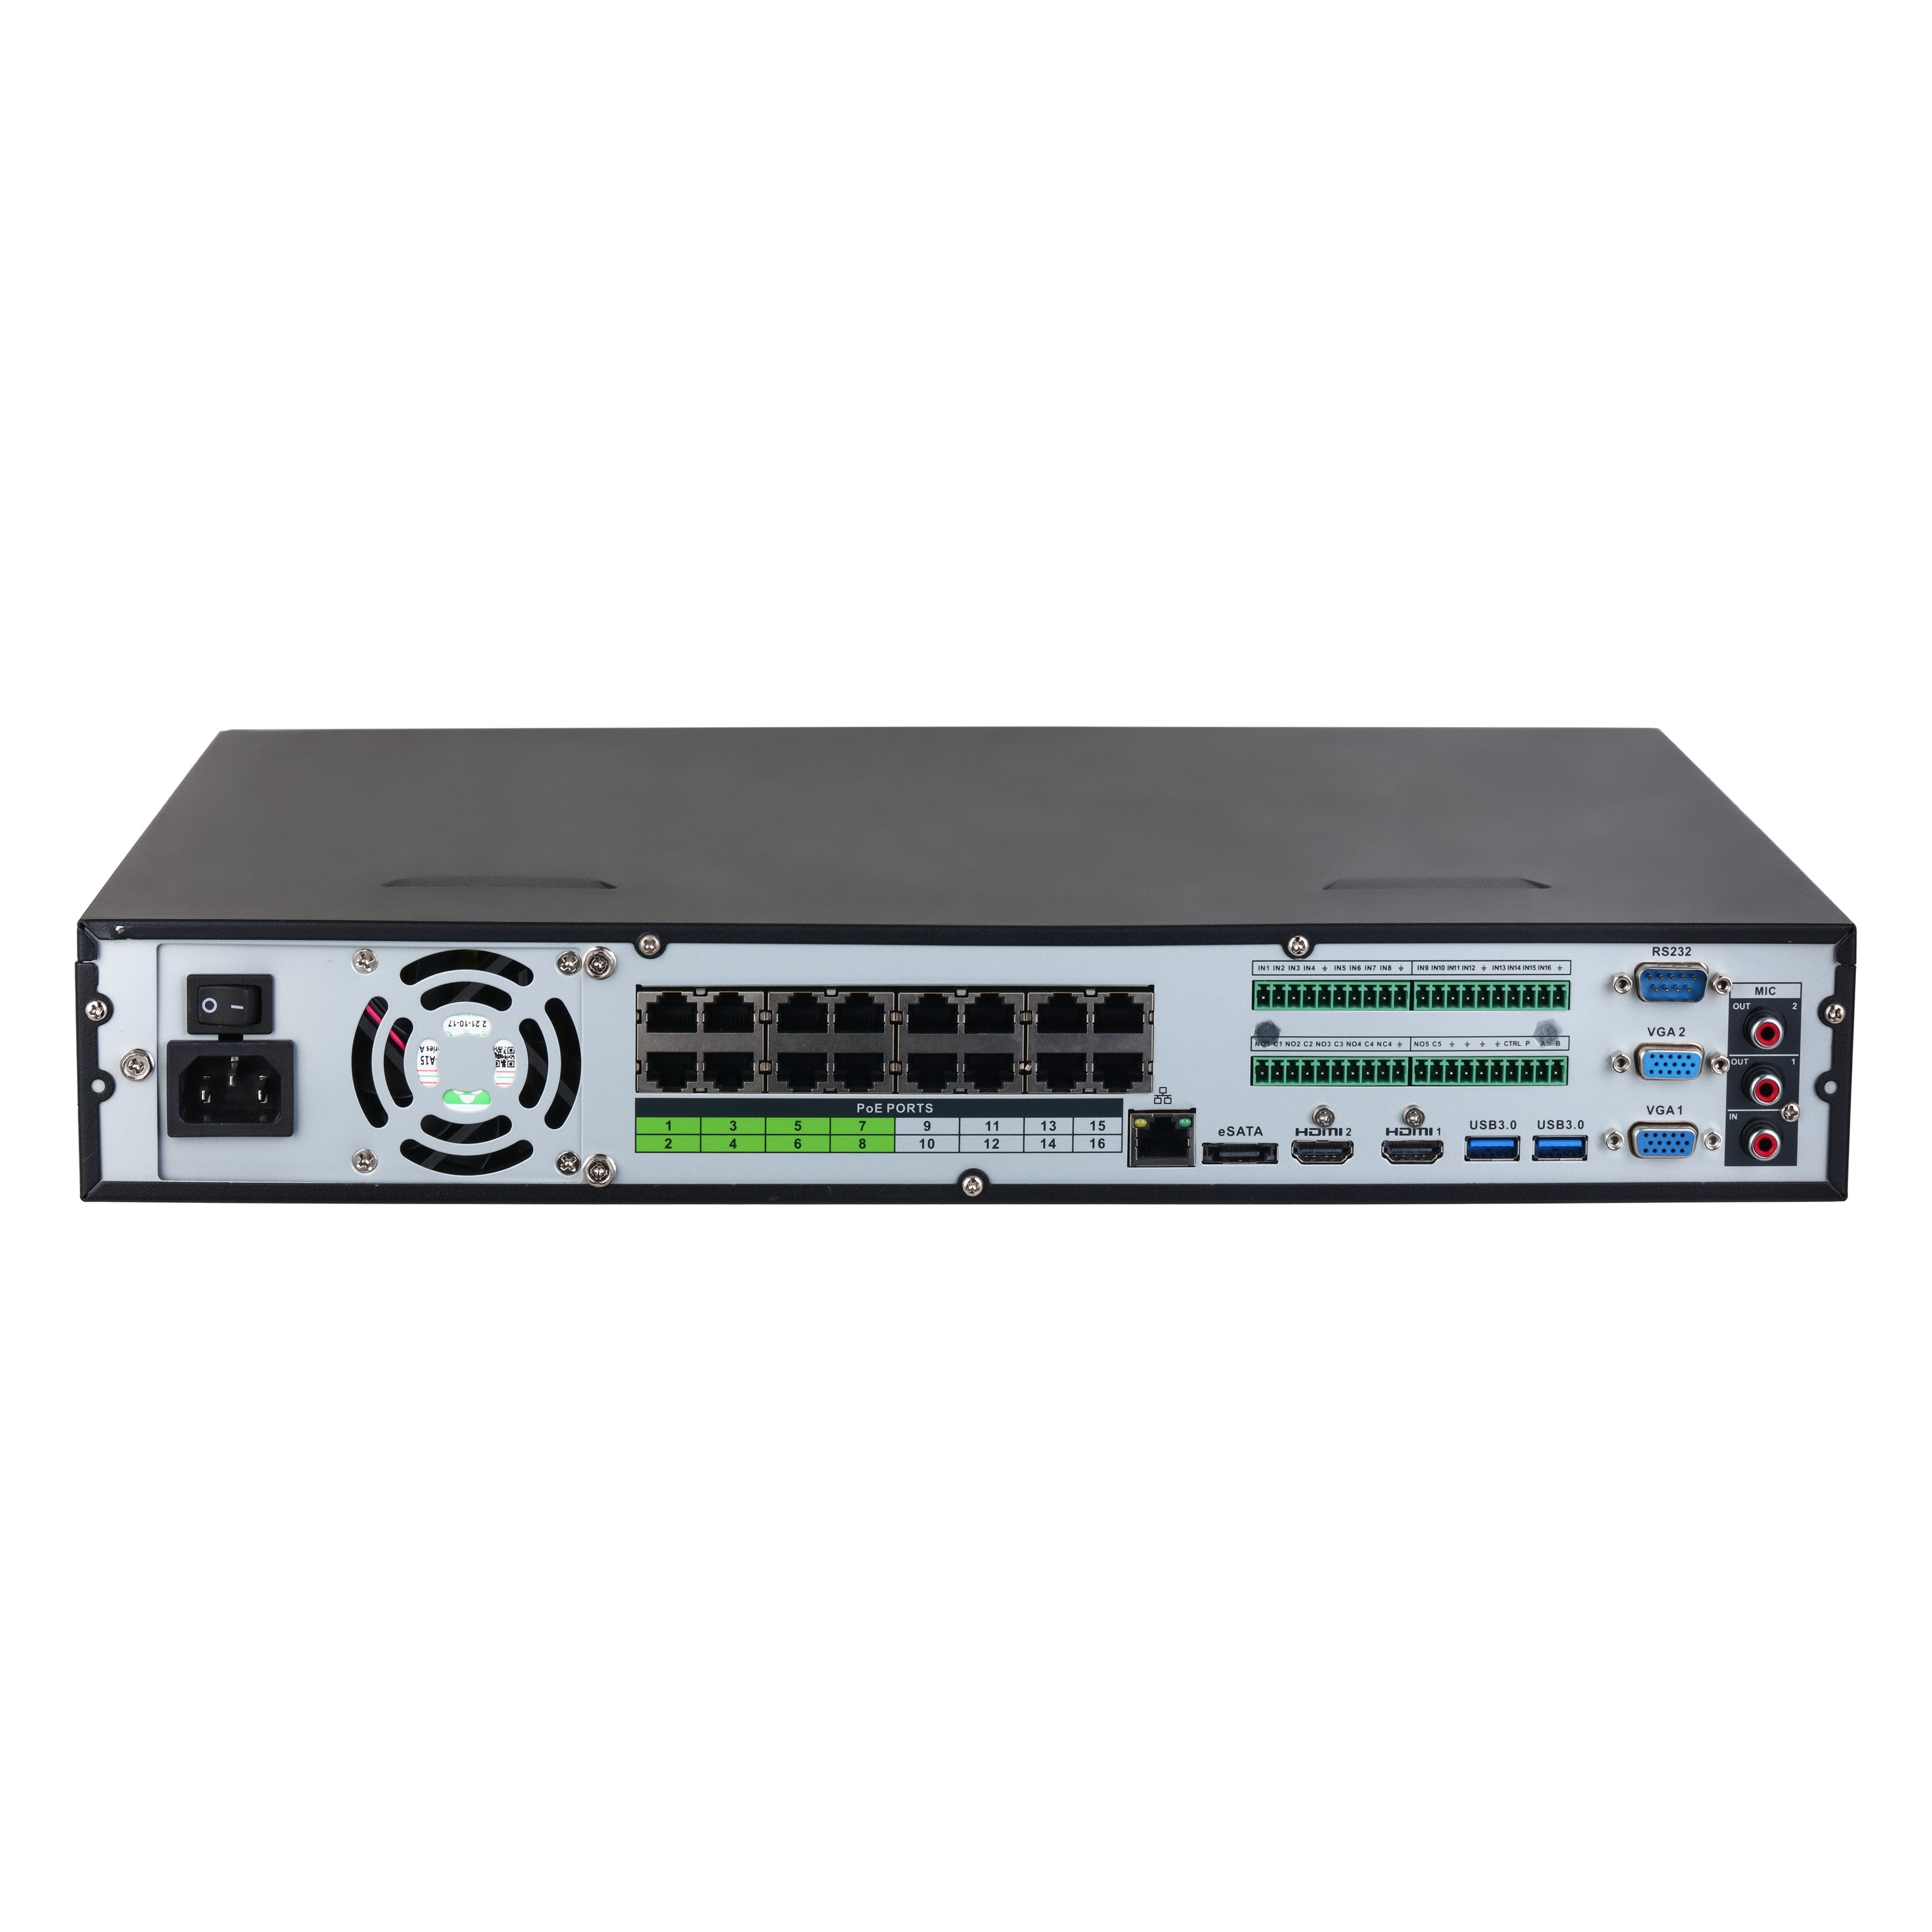 Dahua 32 Channel NVR, WizSense AI Series, 16 x POE (8 x EPOE), 1.5RU, 384MB (200MB With AI Function Enabled), 1 x Gigabit NIC, 4 x HDD **NO HDD INSTALLED**